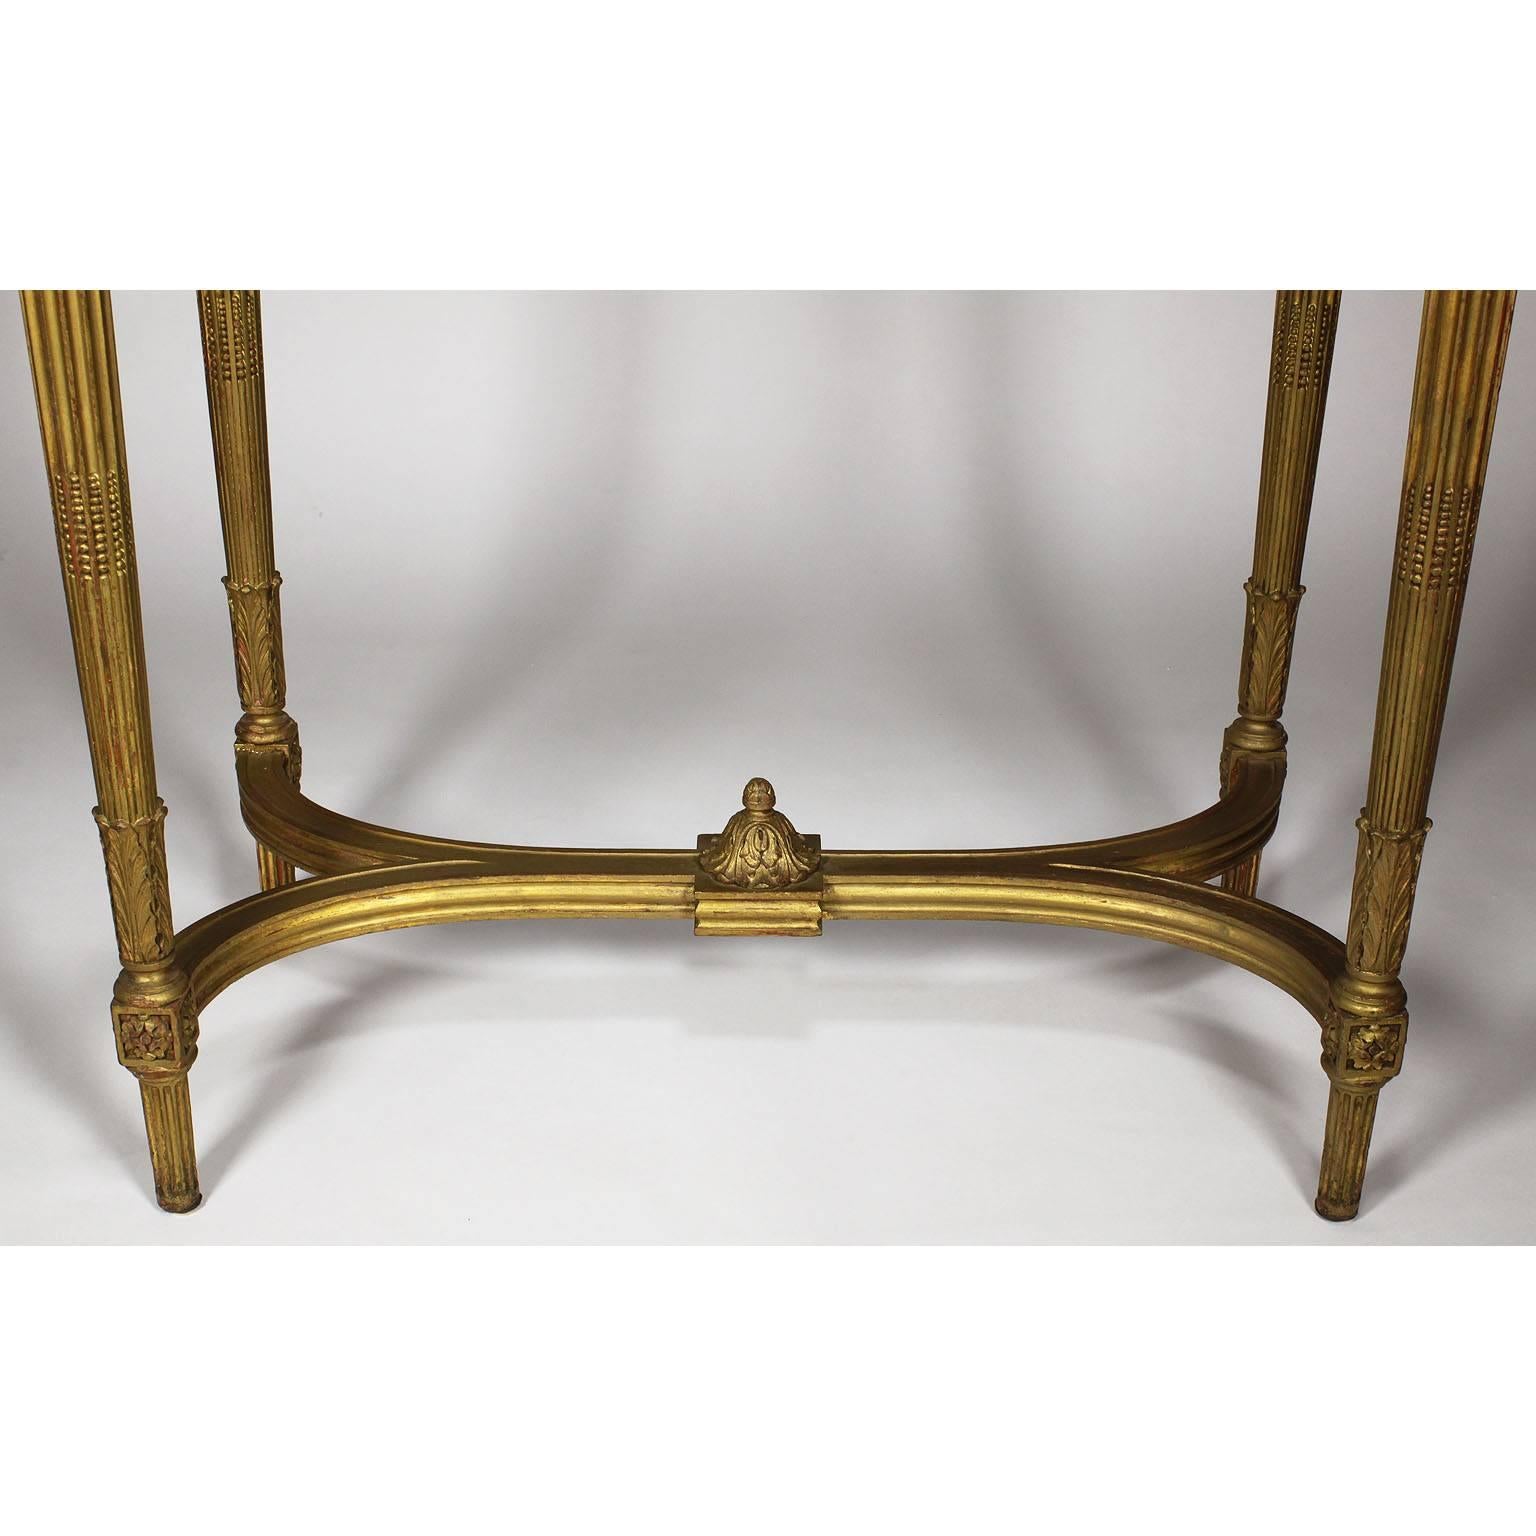 Early 20th Century French 19th Century Louis XVI Style Giltwood Carved Exhibition Vitrine Table